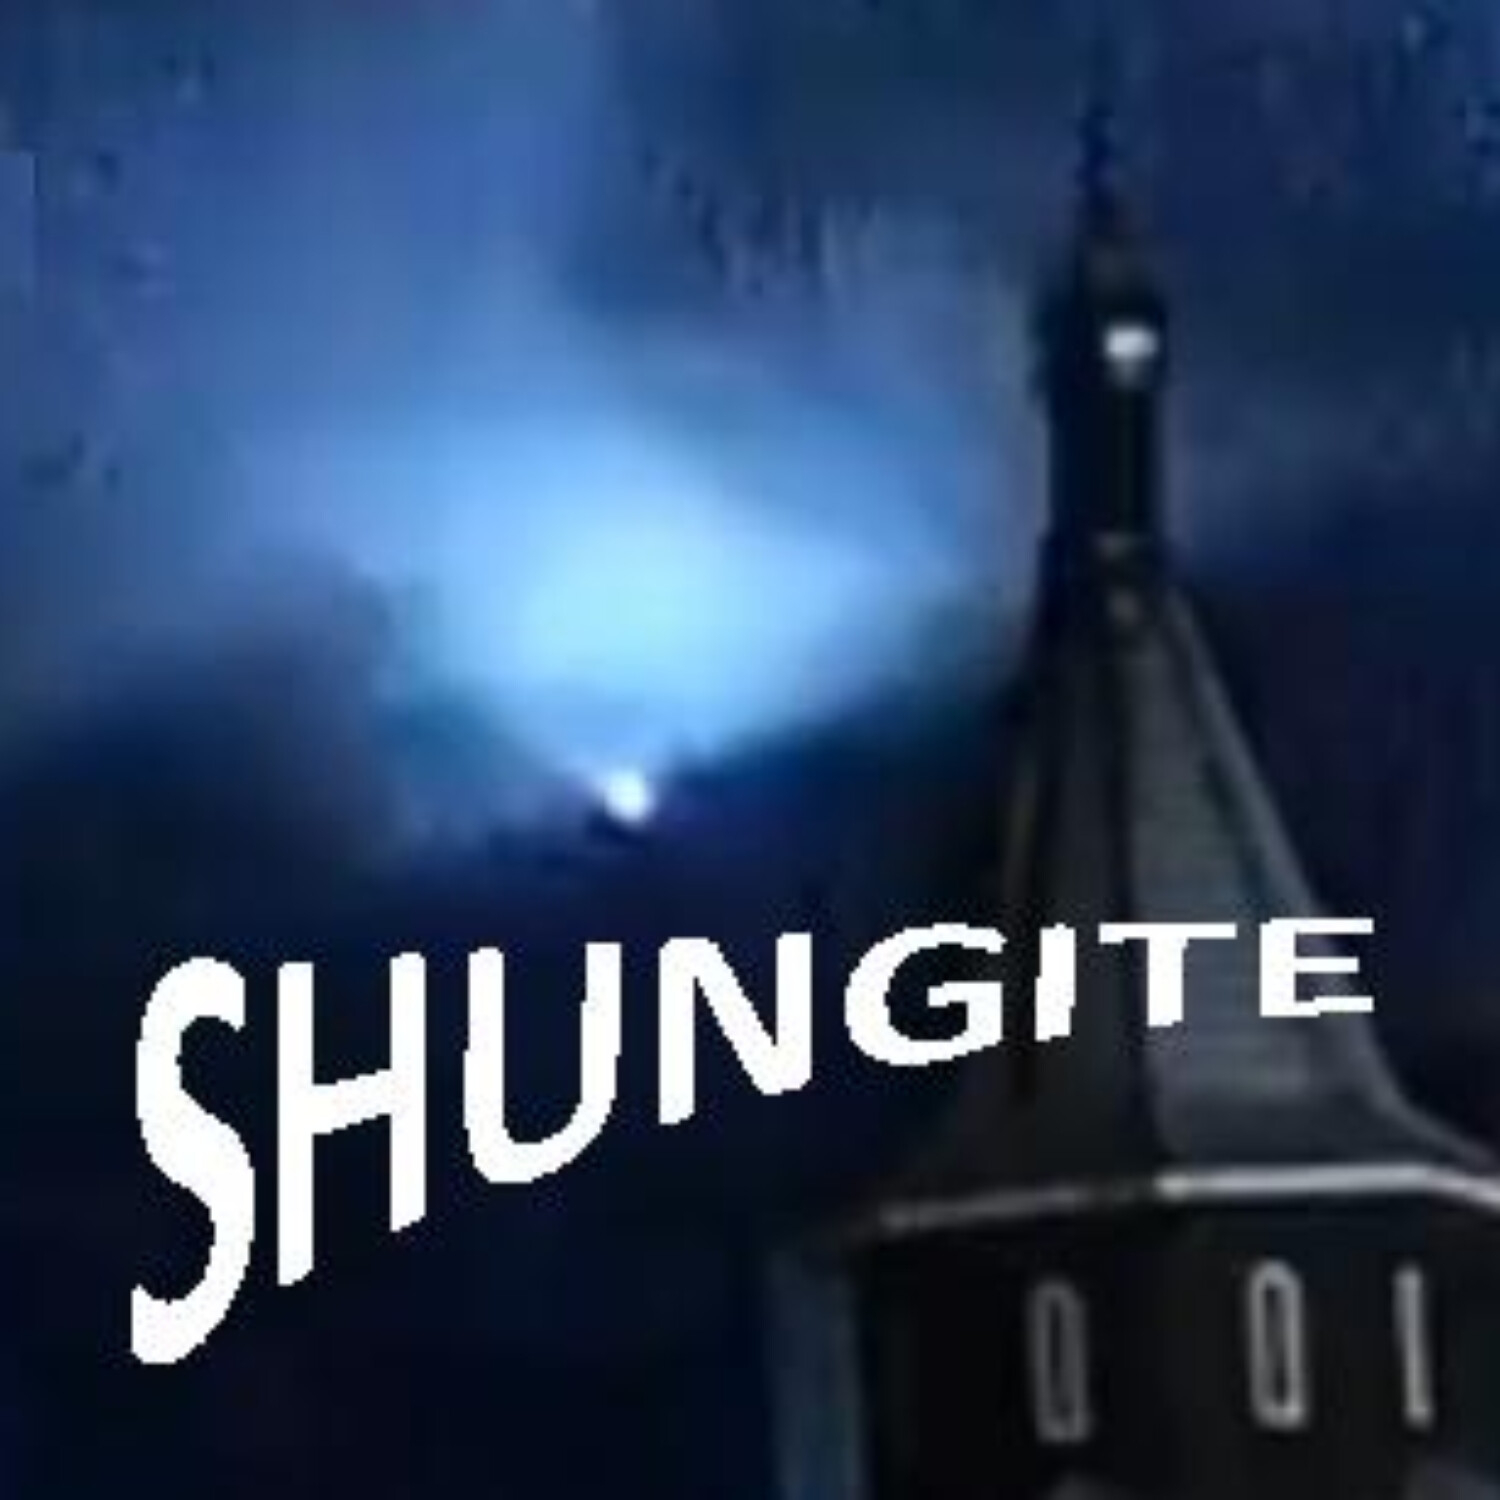 "SHUNGITE REALITY” 4/5/22 - 3D Printing-Prepping with Energy